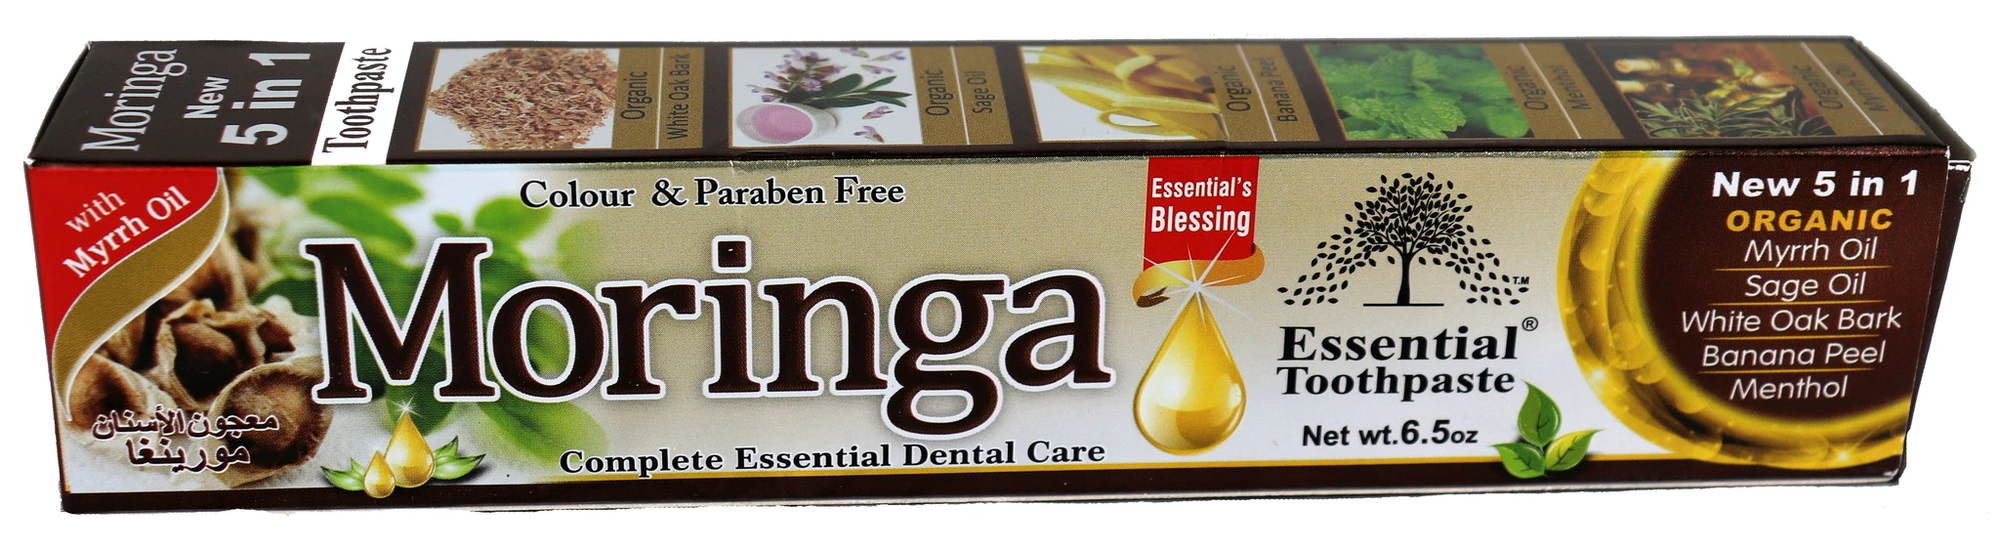 Essential's Blessing Moringa 5 in 1 Organic Toothpaste 6.5oz